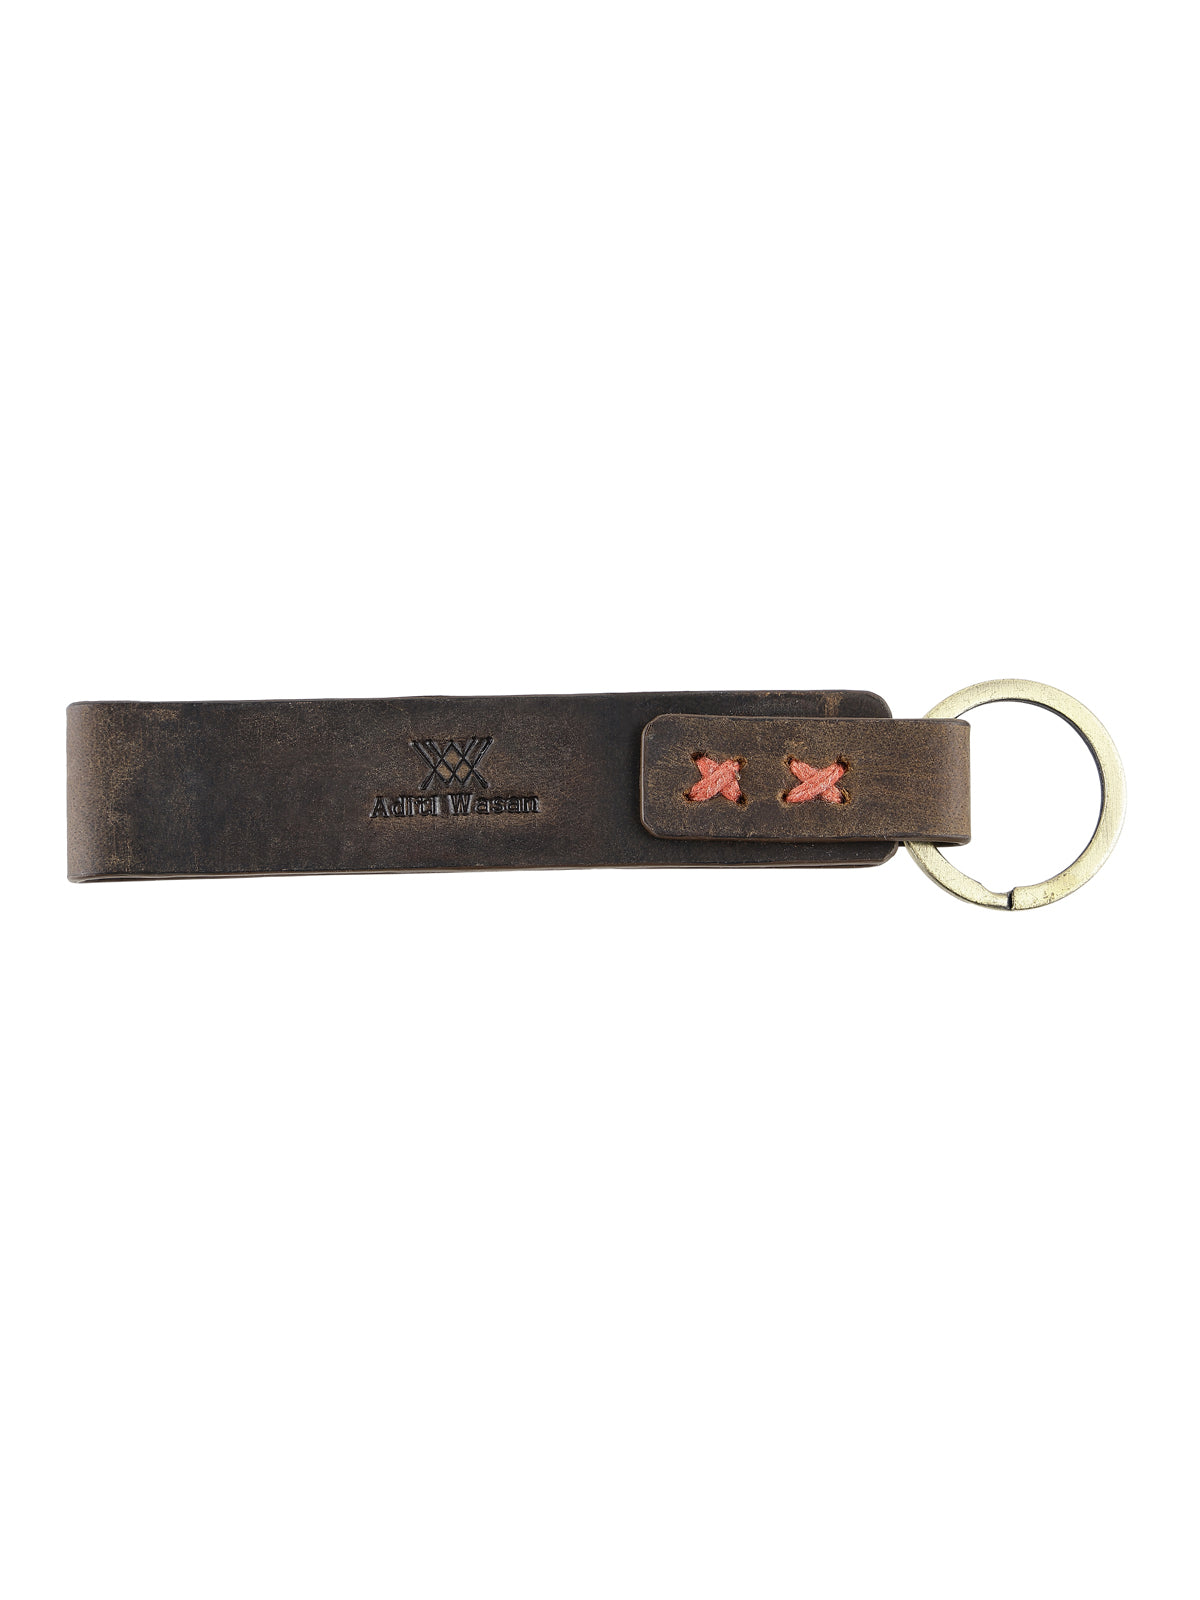 Genunie Leather Keyring With Red Stiched Detailing - Brown